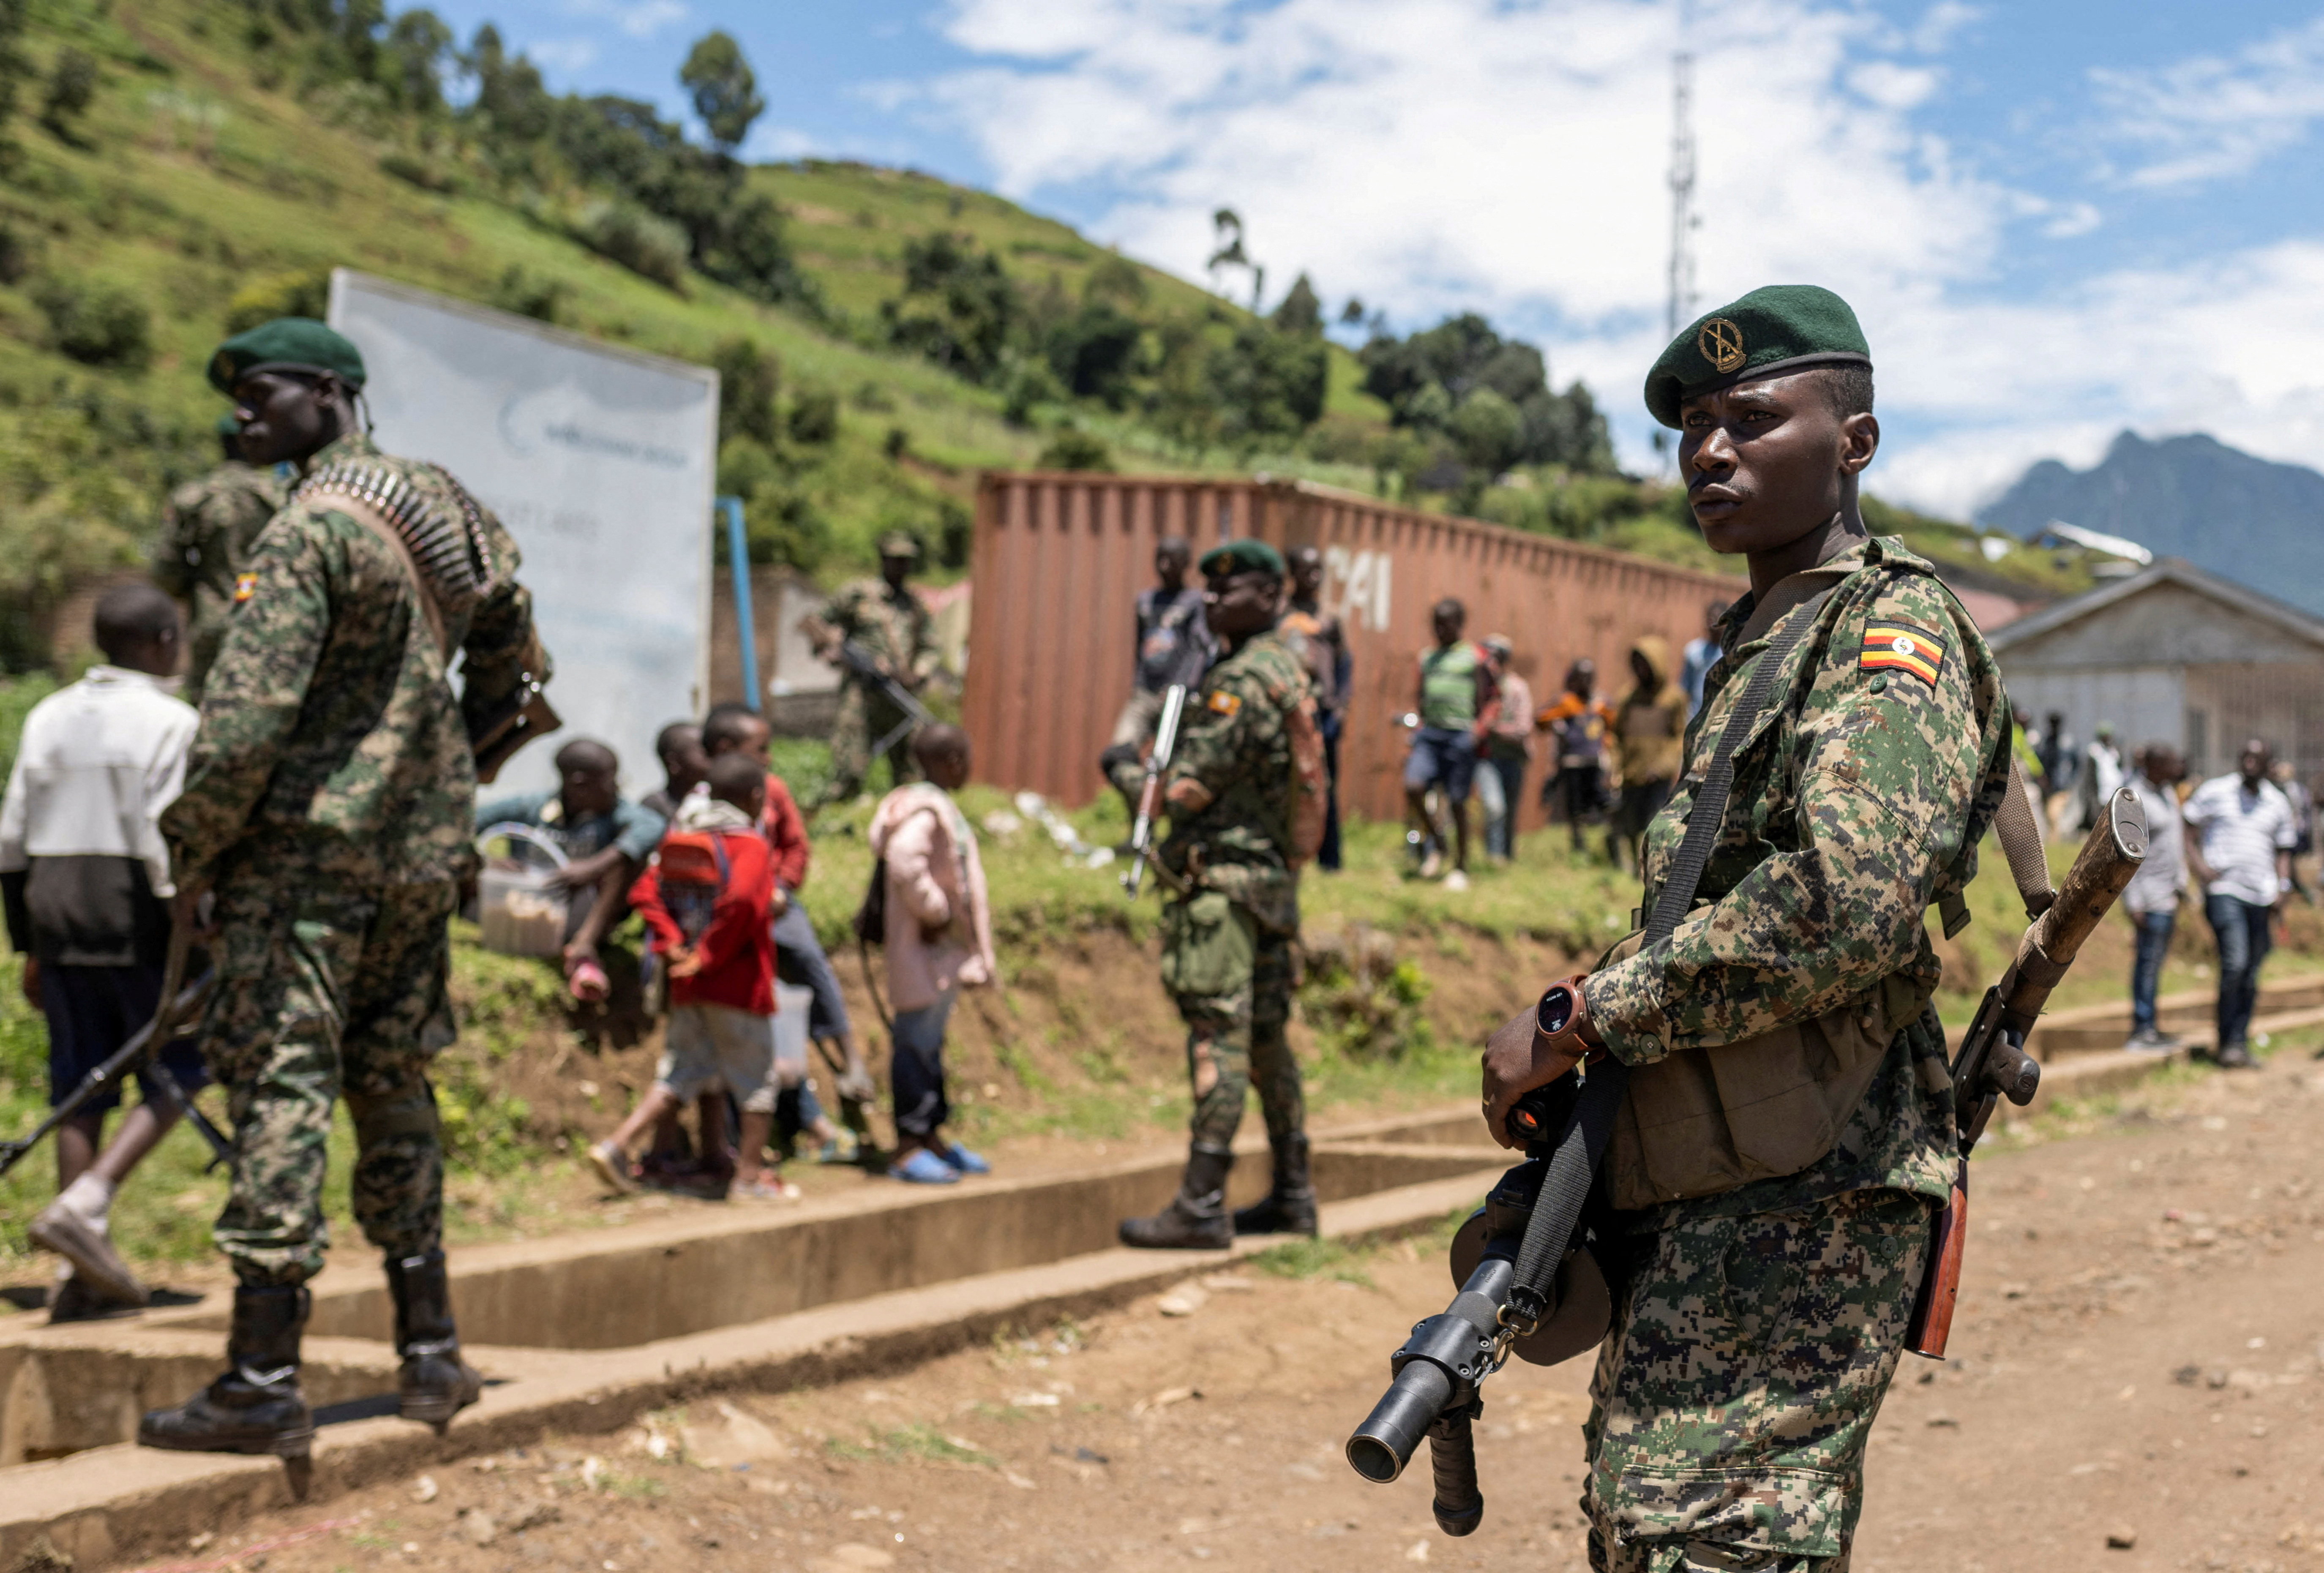 Members of the Ugandan army, part of the troops to the EACRF, patrol a settlement ceded by M23 rebels fighters in Bunagana